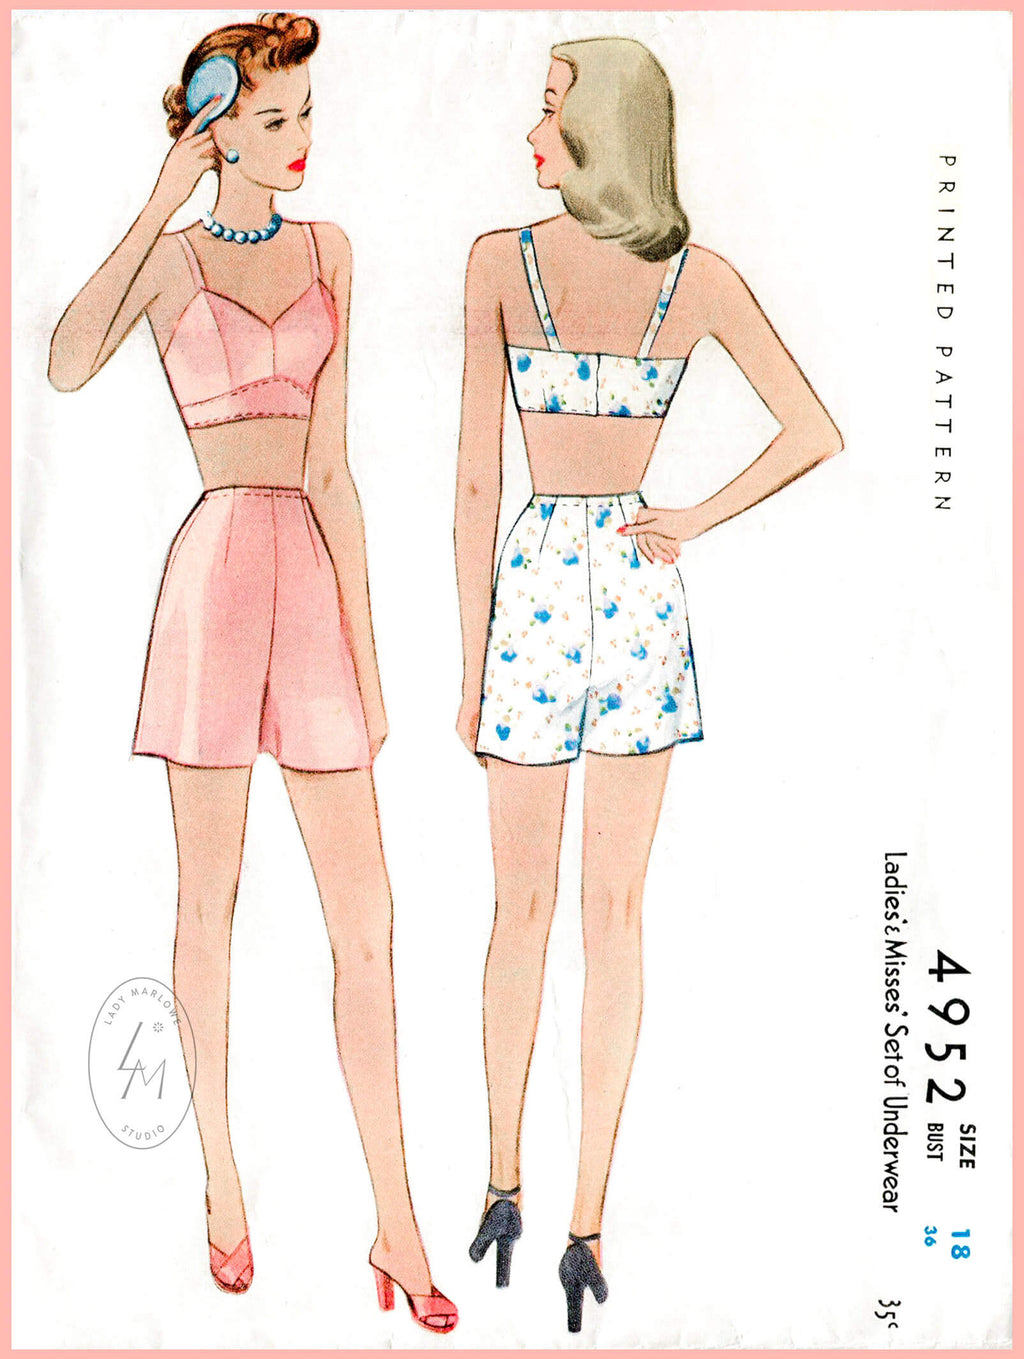 McCall 4952 1940s bra and tap shorts vintage lingerie sewing pattern